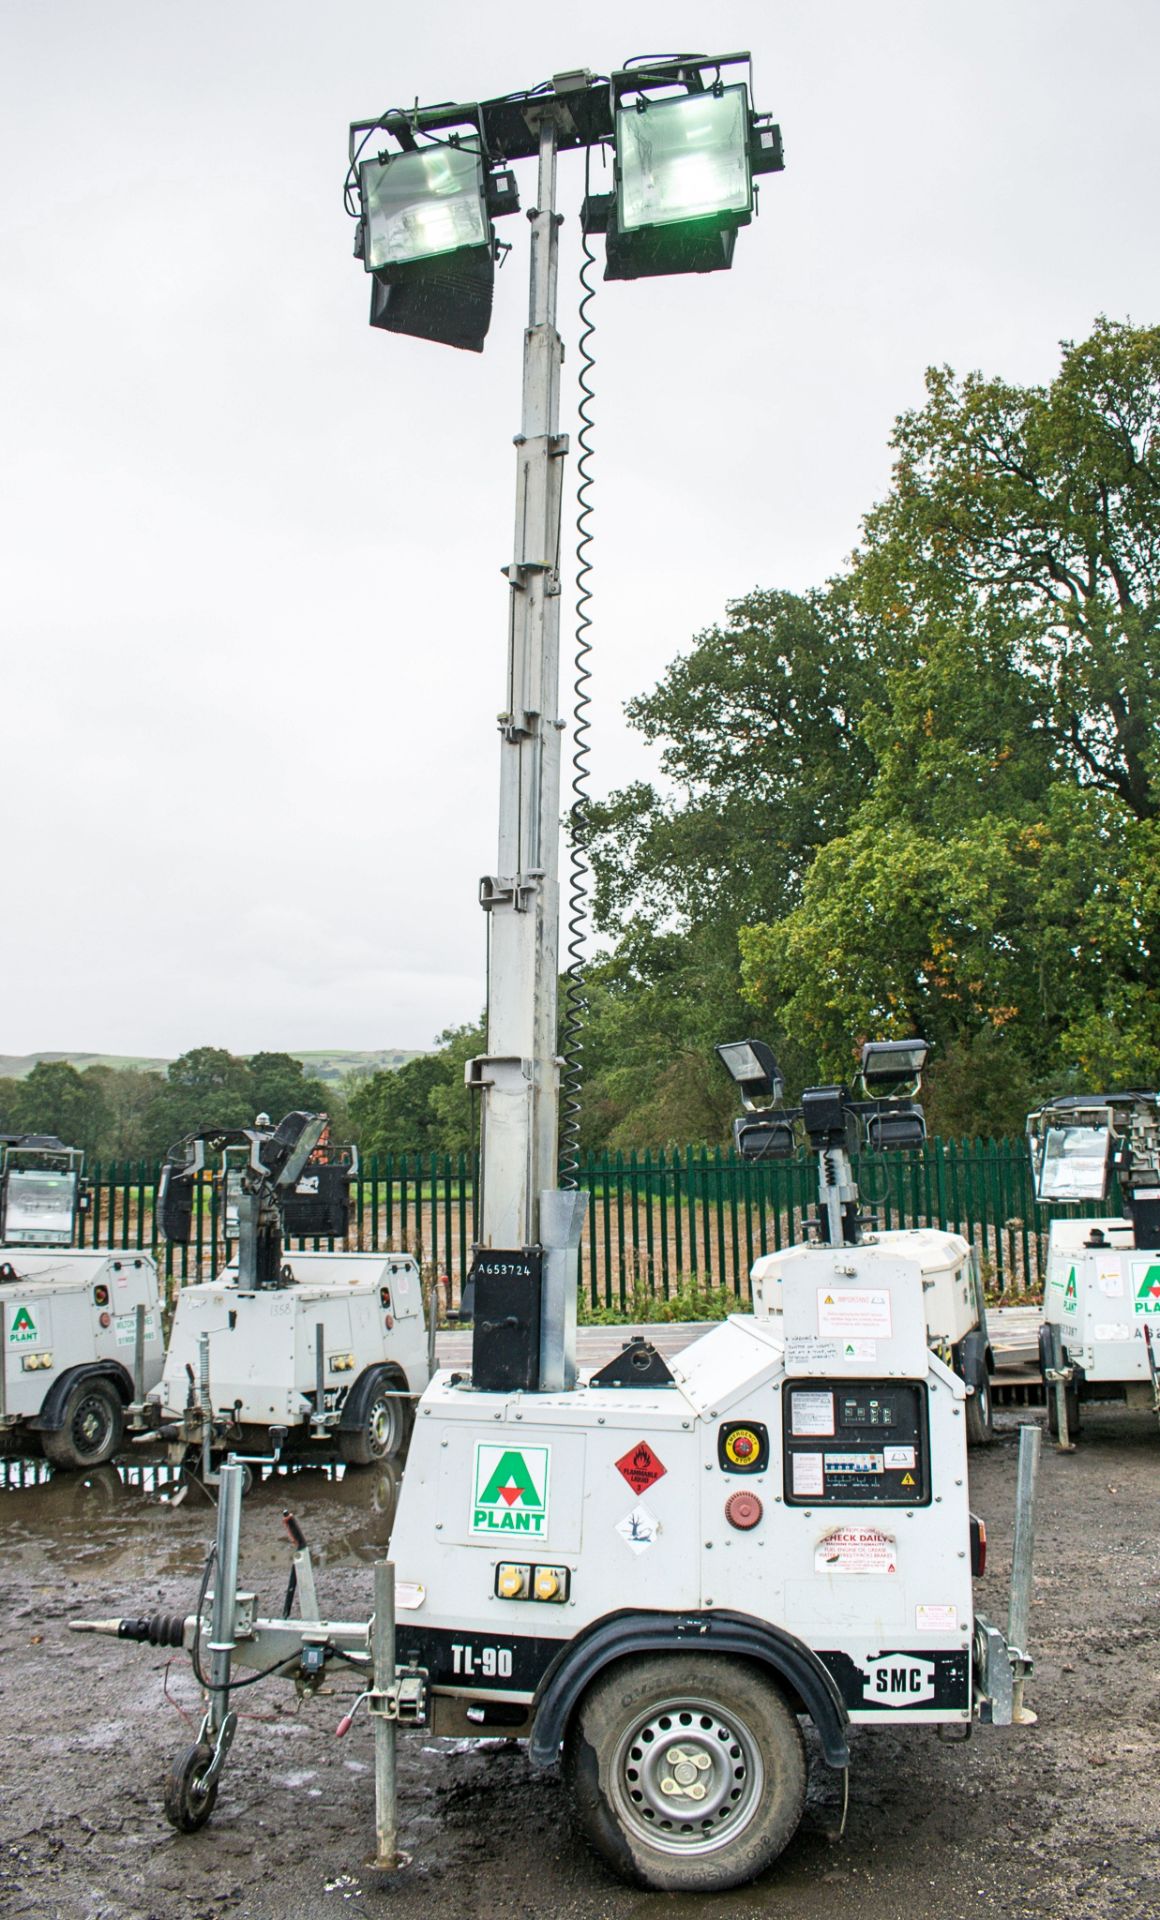 SMC TL-90 diesel driven mobile lighting tower Year: 2014 S/N: 1411151 Recorded Hours: 2394 A653724 - Image 6 of 8